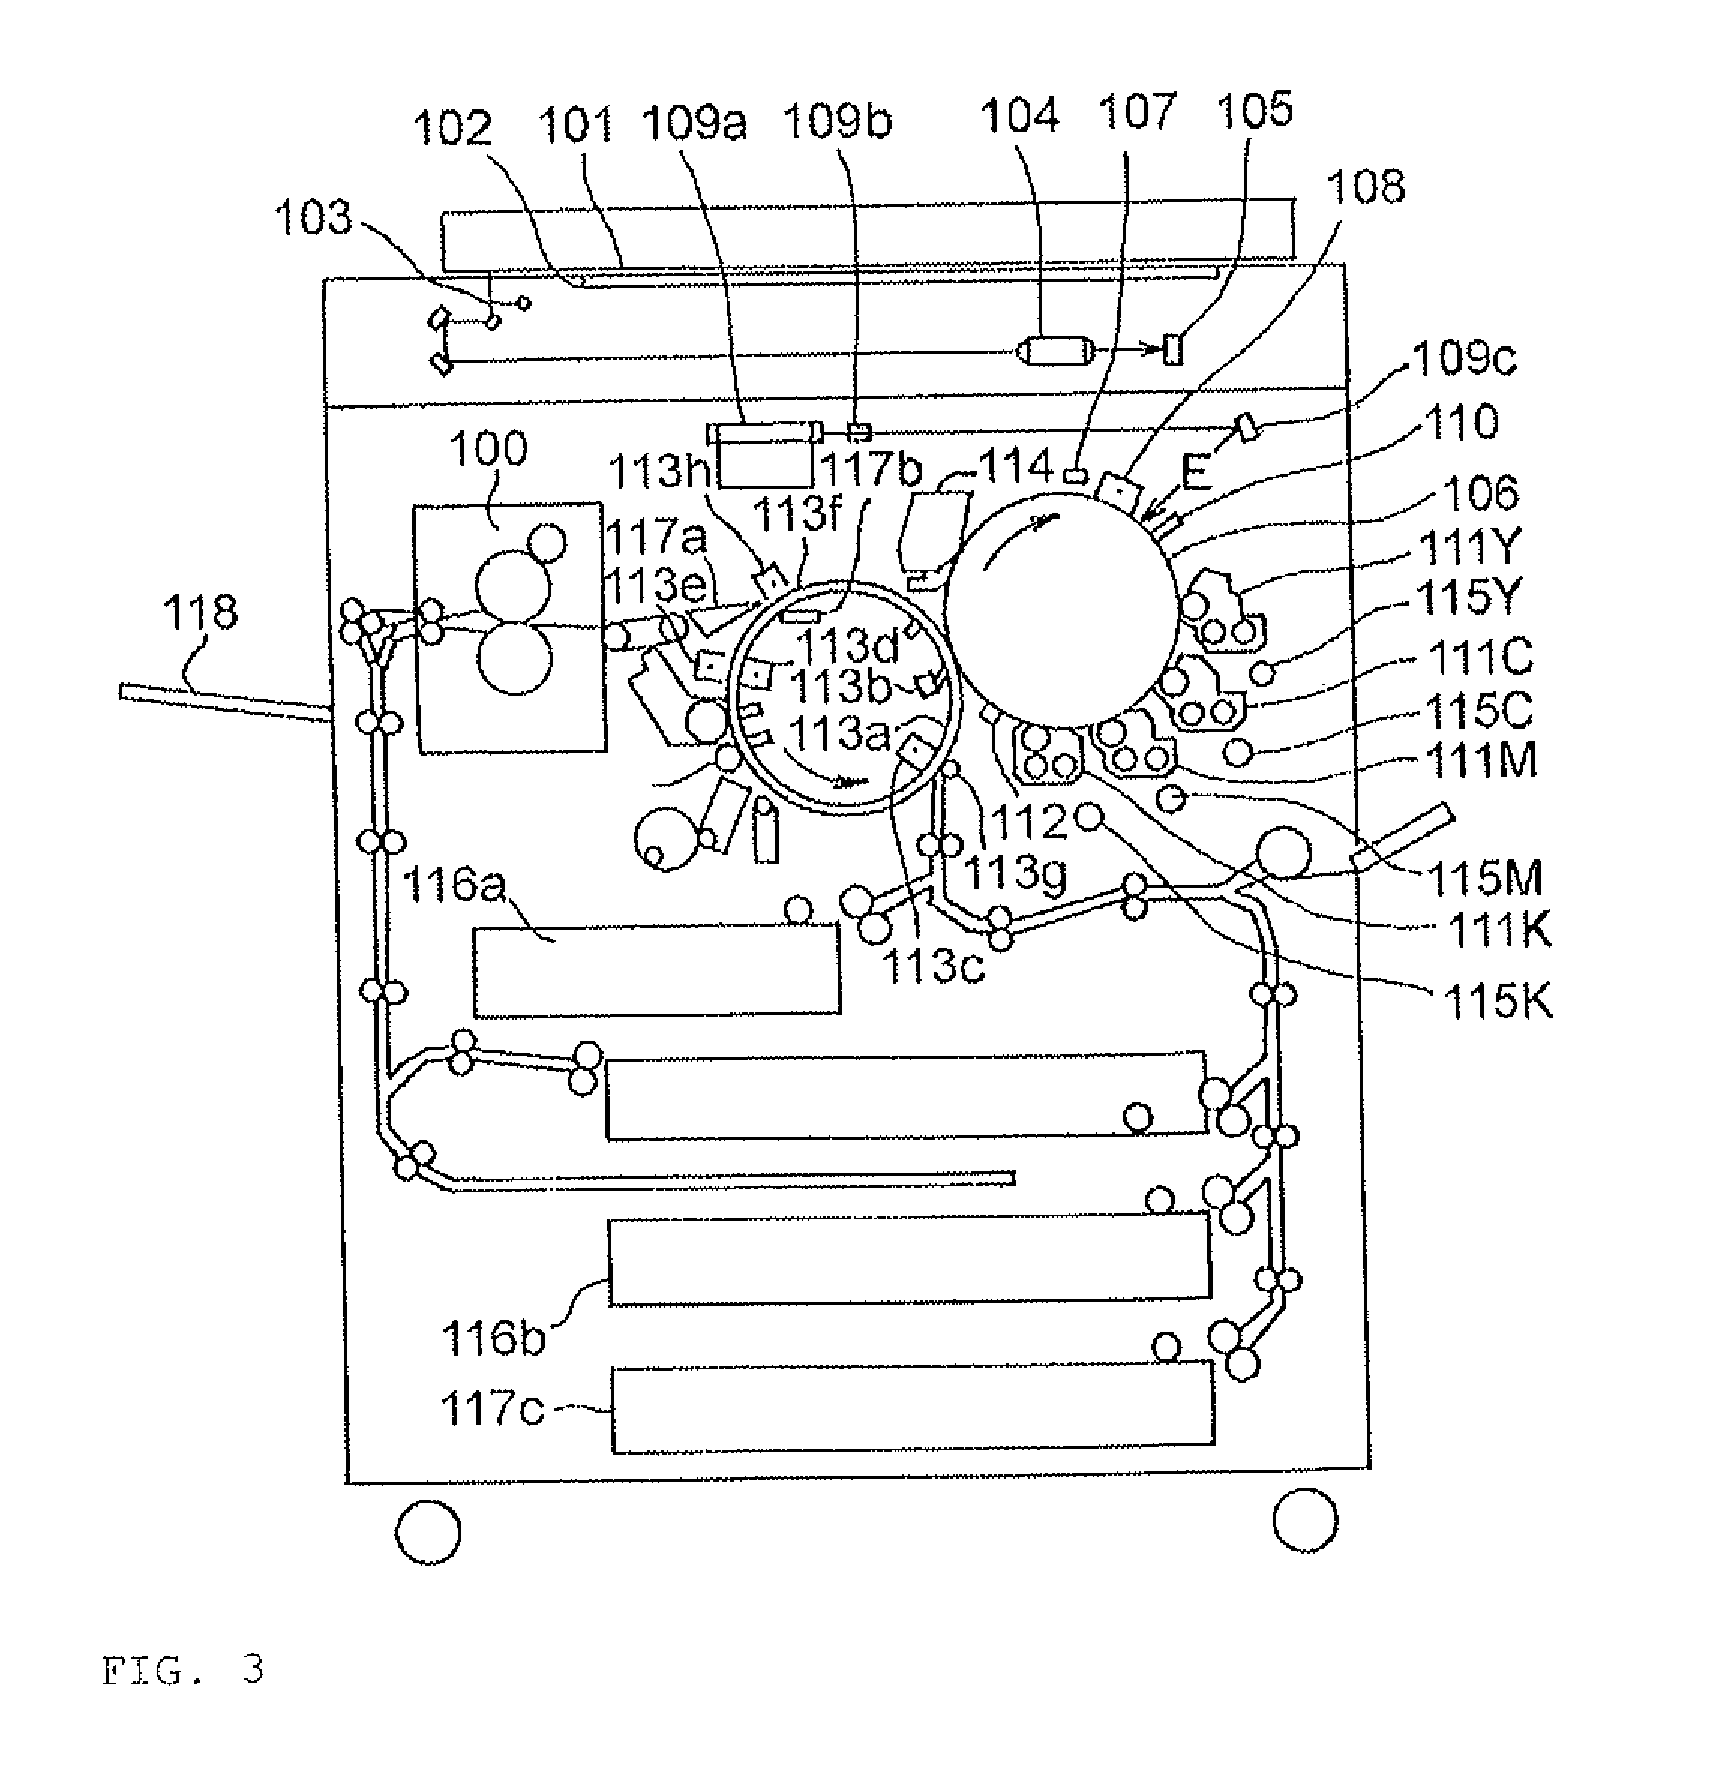 Full-color image-forming method